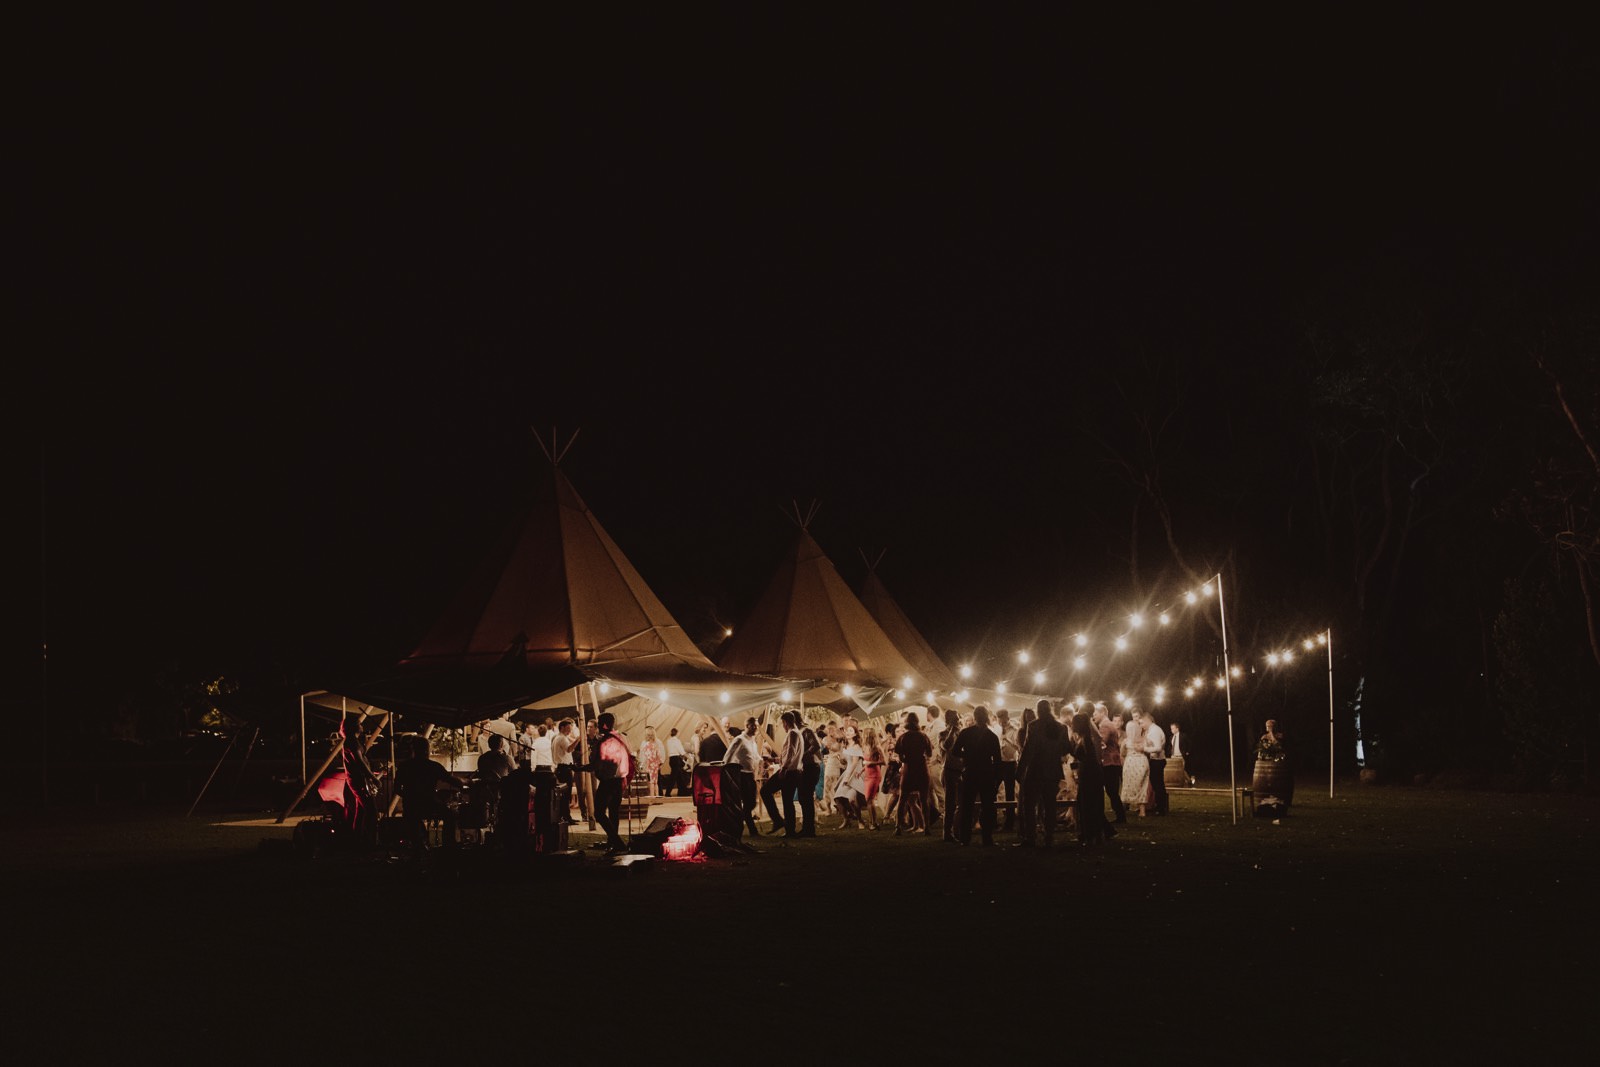 final scene of guests under the reception tipi